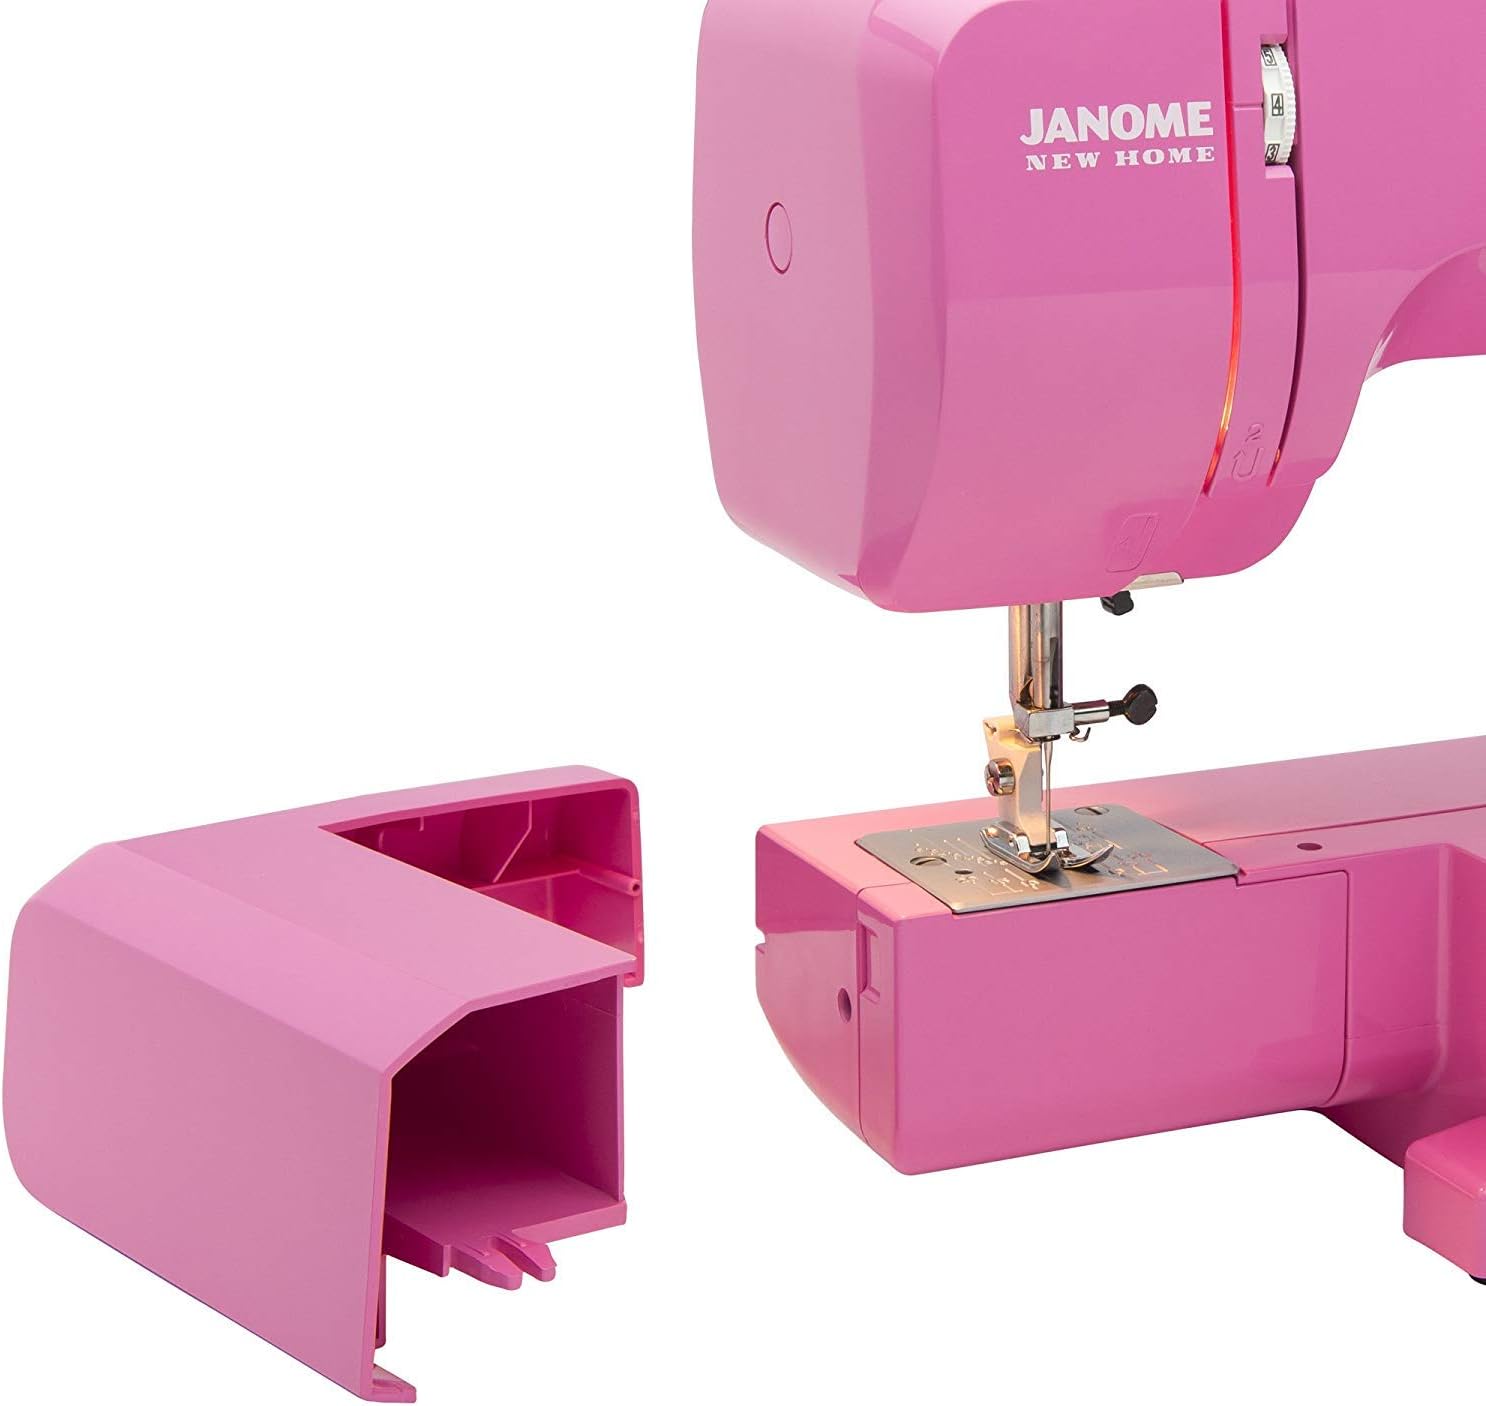 Janome Easy to Use Sewing Machine Review